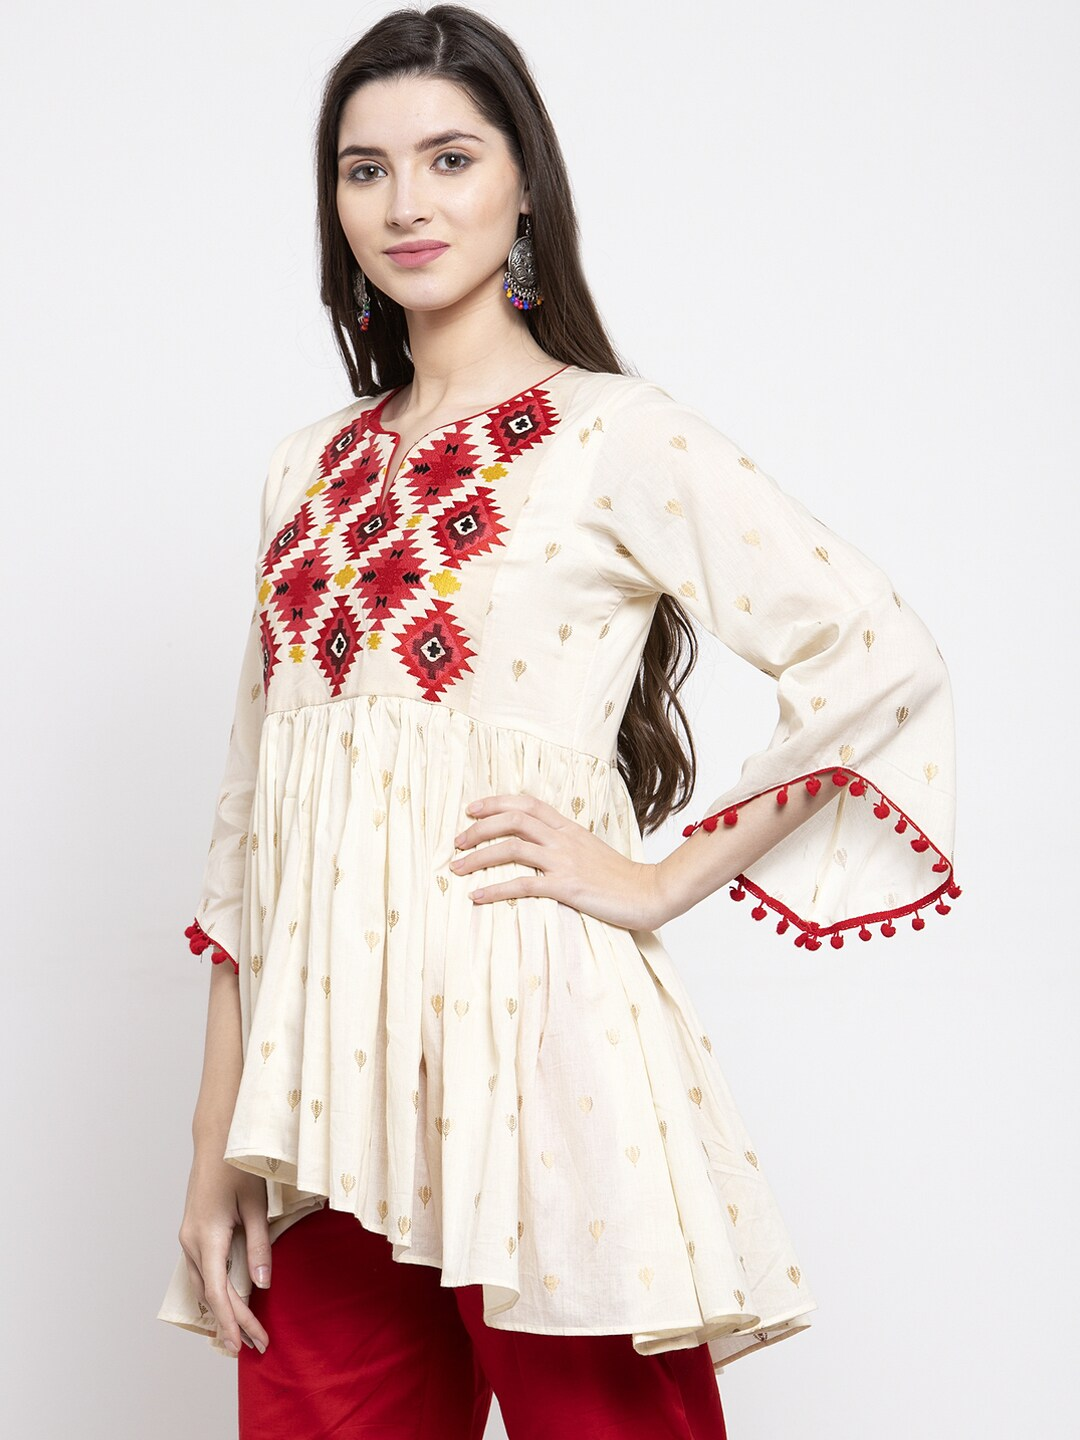 Women's  Off-White & Red Printed Tunic - Wahe-NOOR